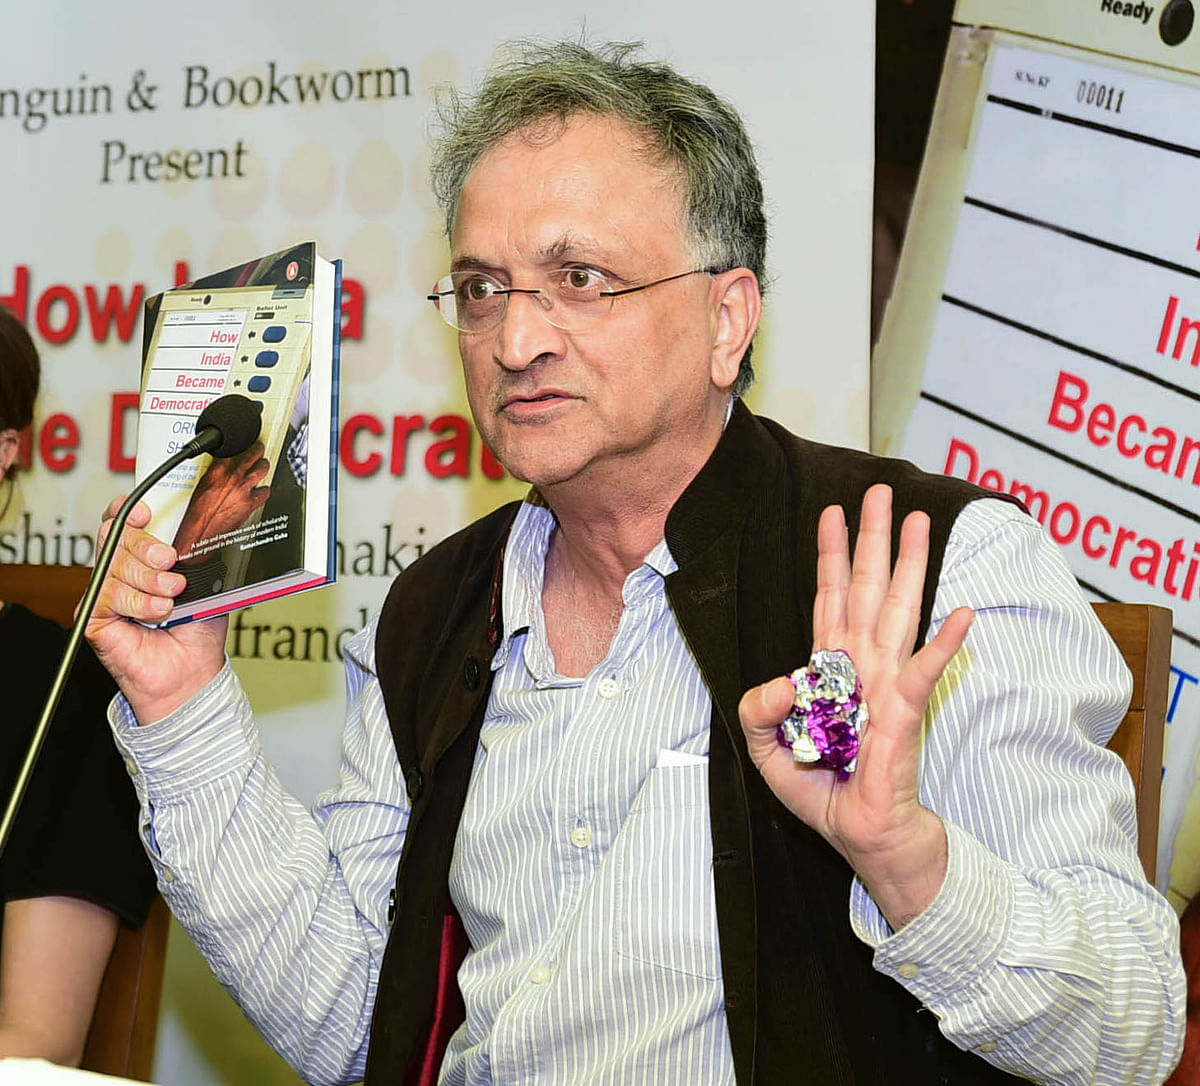 Migrant woes 'greatest manmade tragedy' in India since Partition: Ramchandra Guha